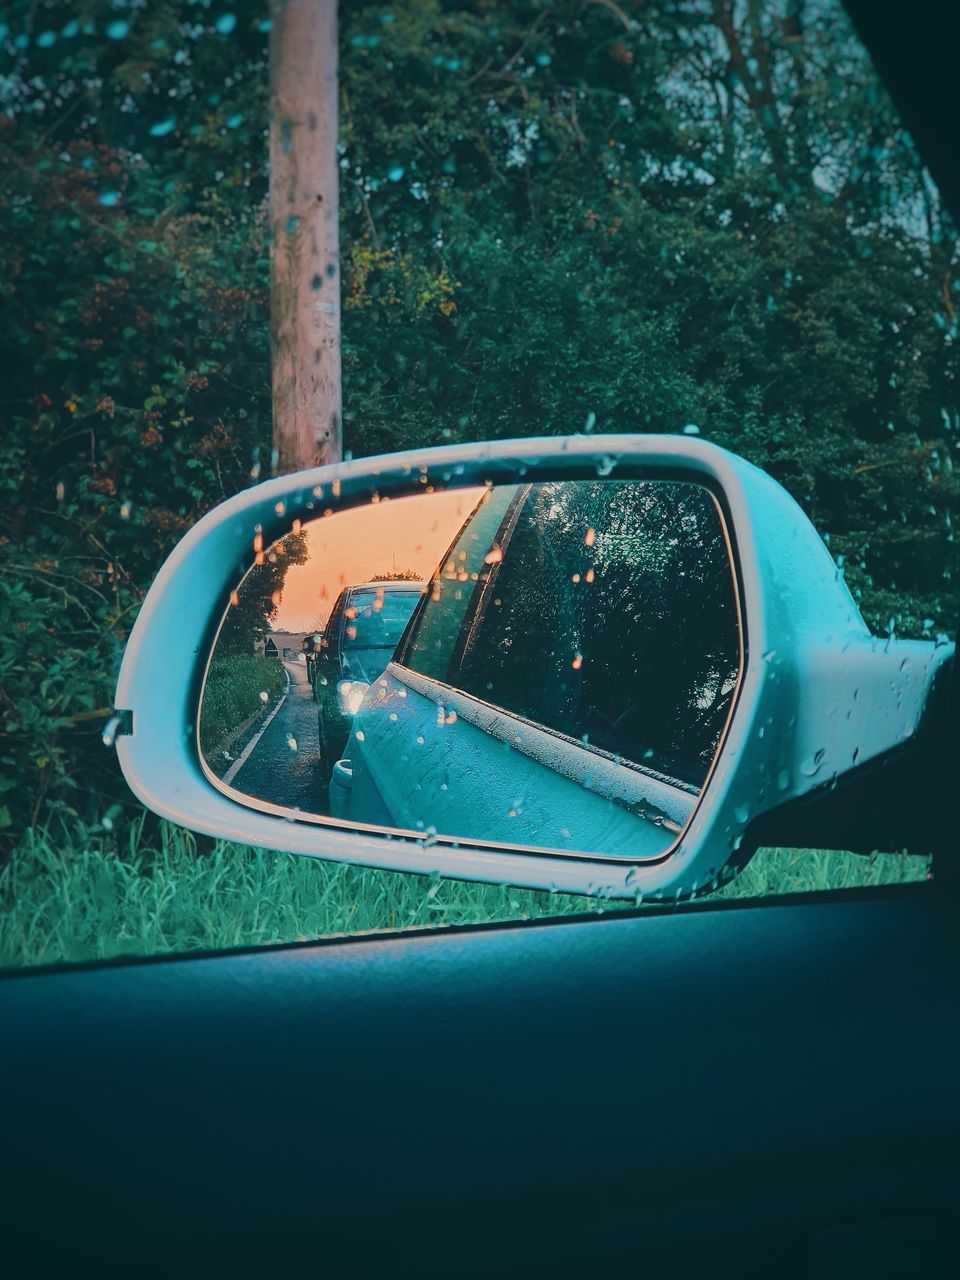 mode of transportation, transportation, car, motor vehicle, land vehicle, glass - material, reflection, side-view mirror, no people, day, nature, tree, plant, close-up, outdoors, water, wet, travel, transparent, raindrop